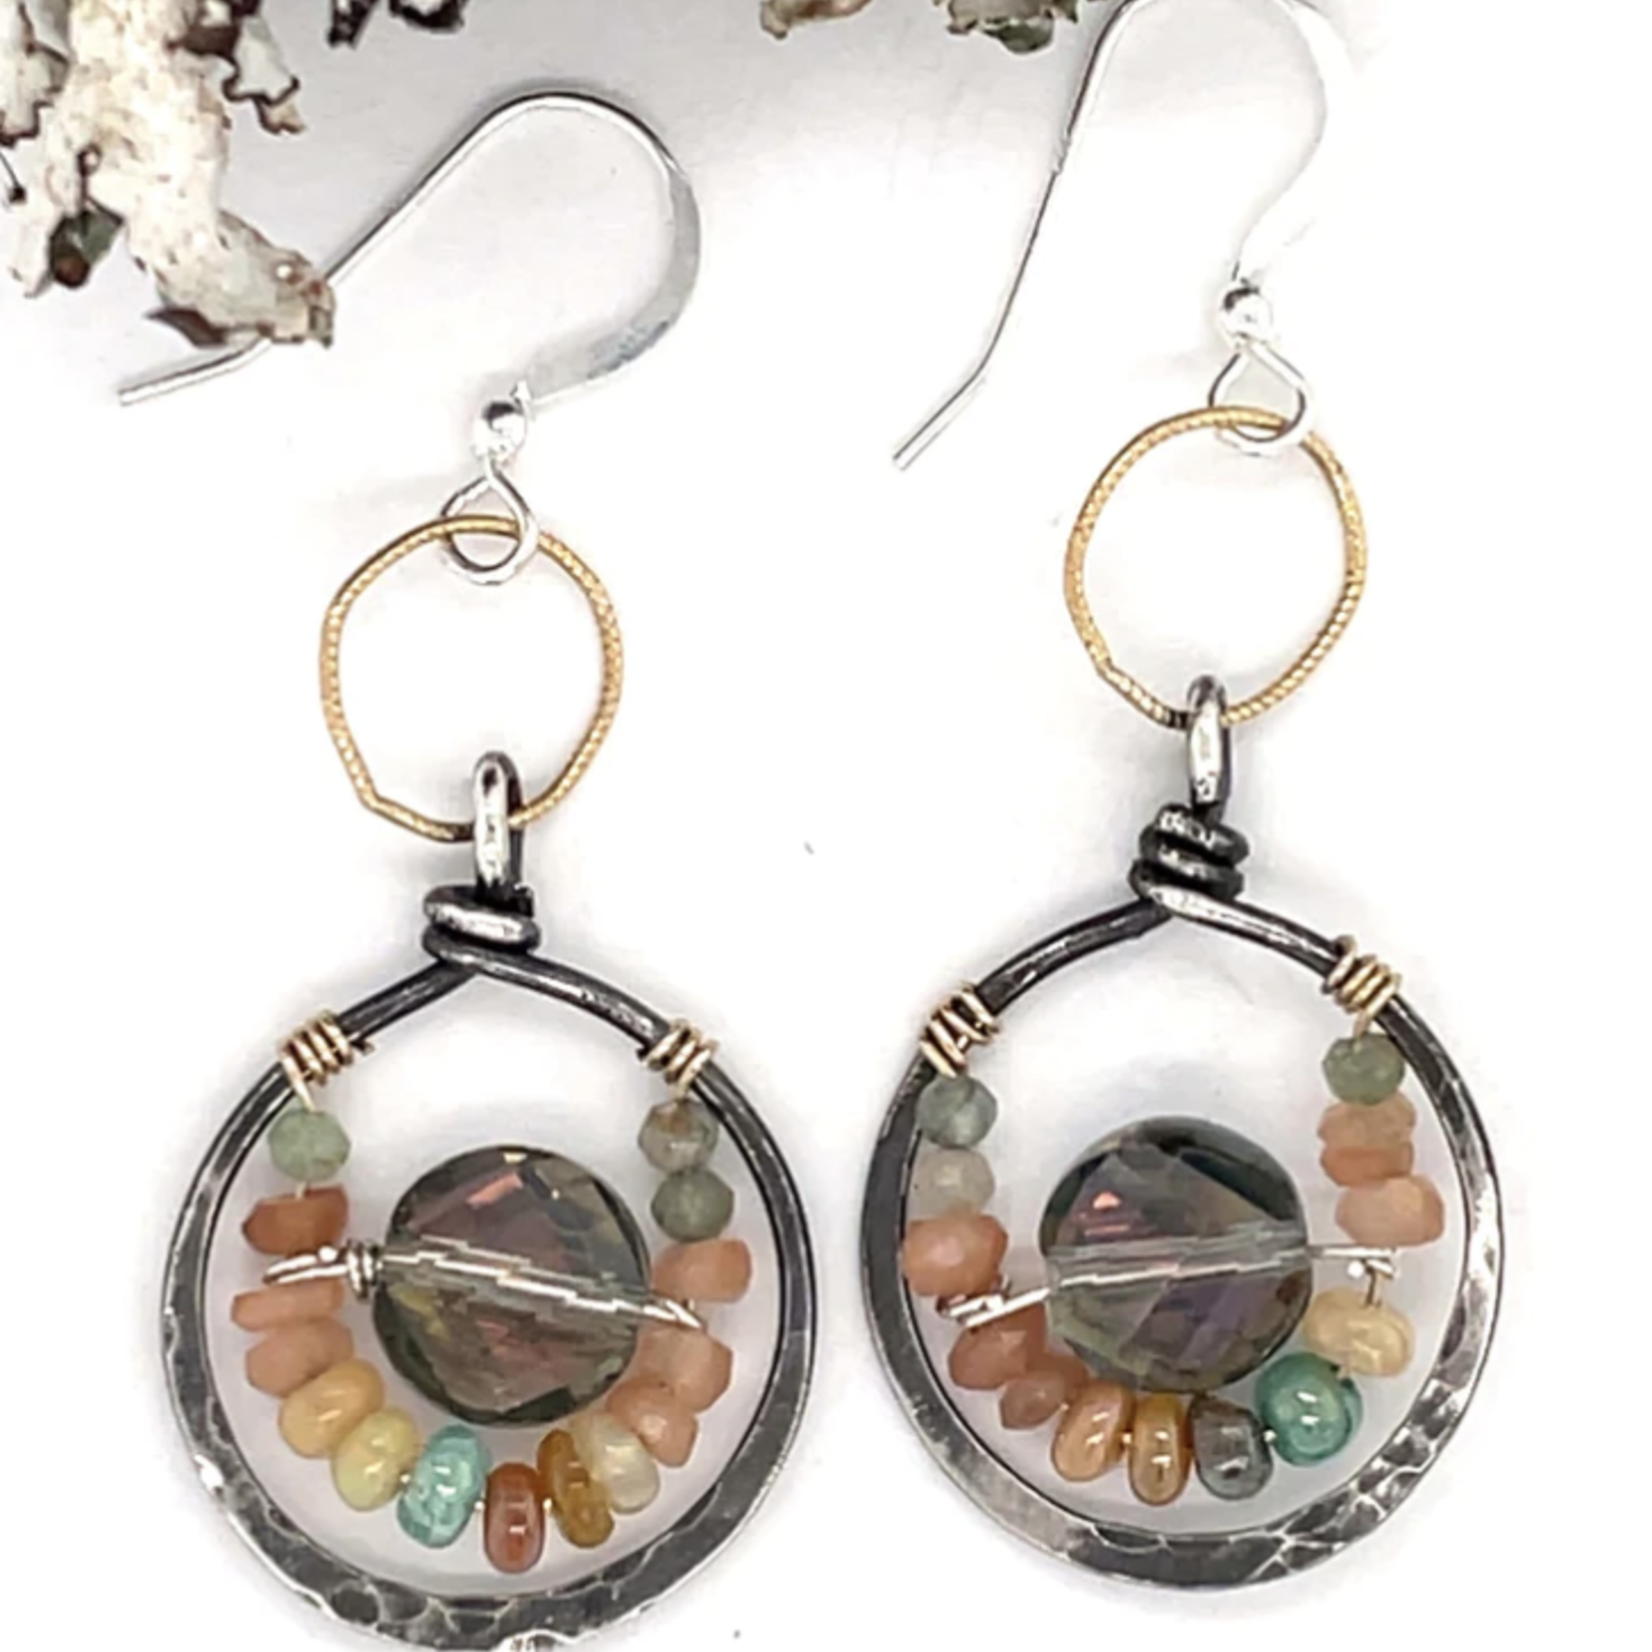 Handmade Opalescent Coin Earrings by Art by Any Means